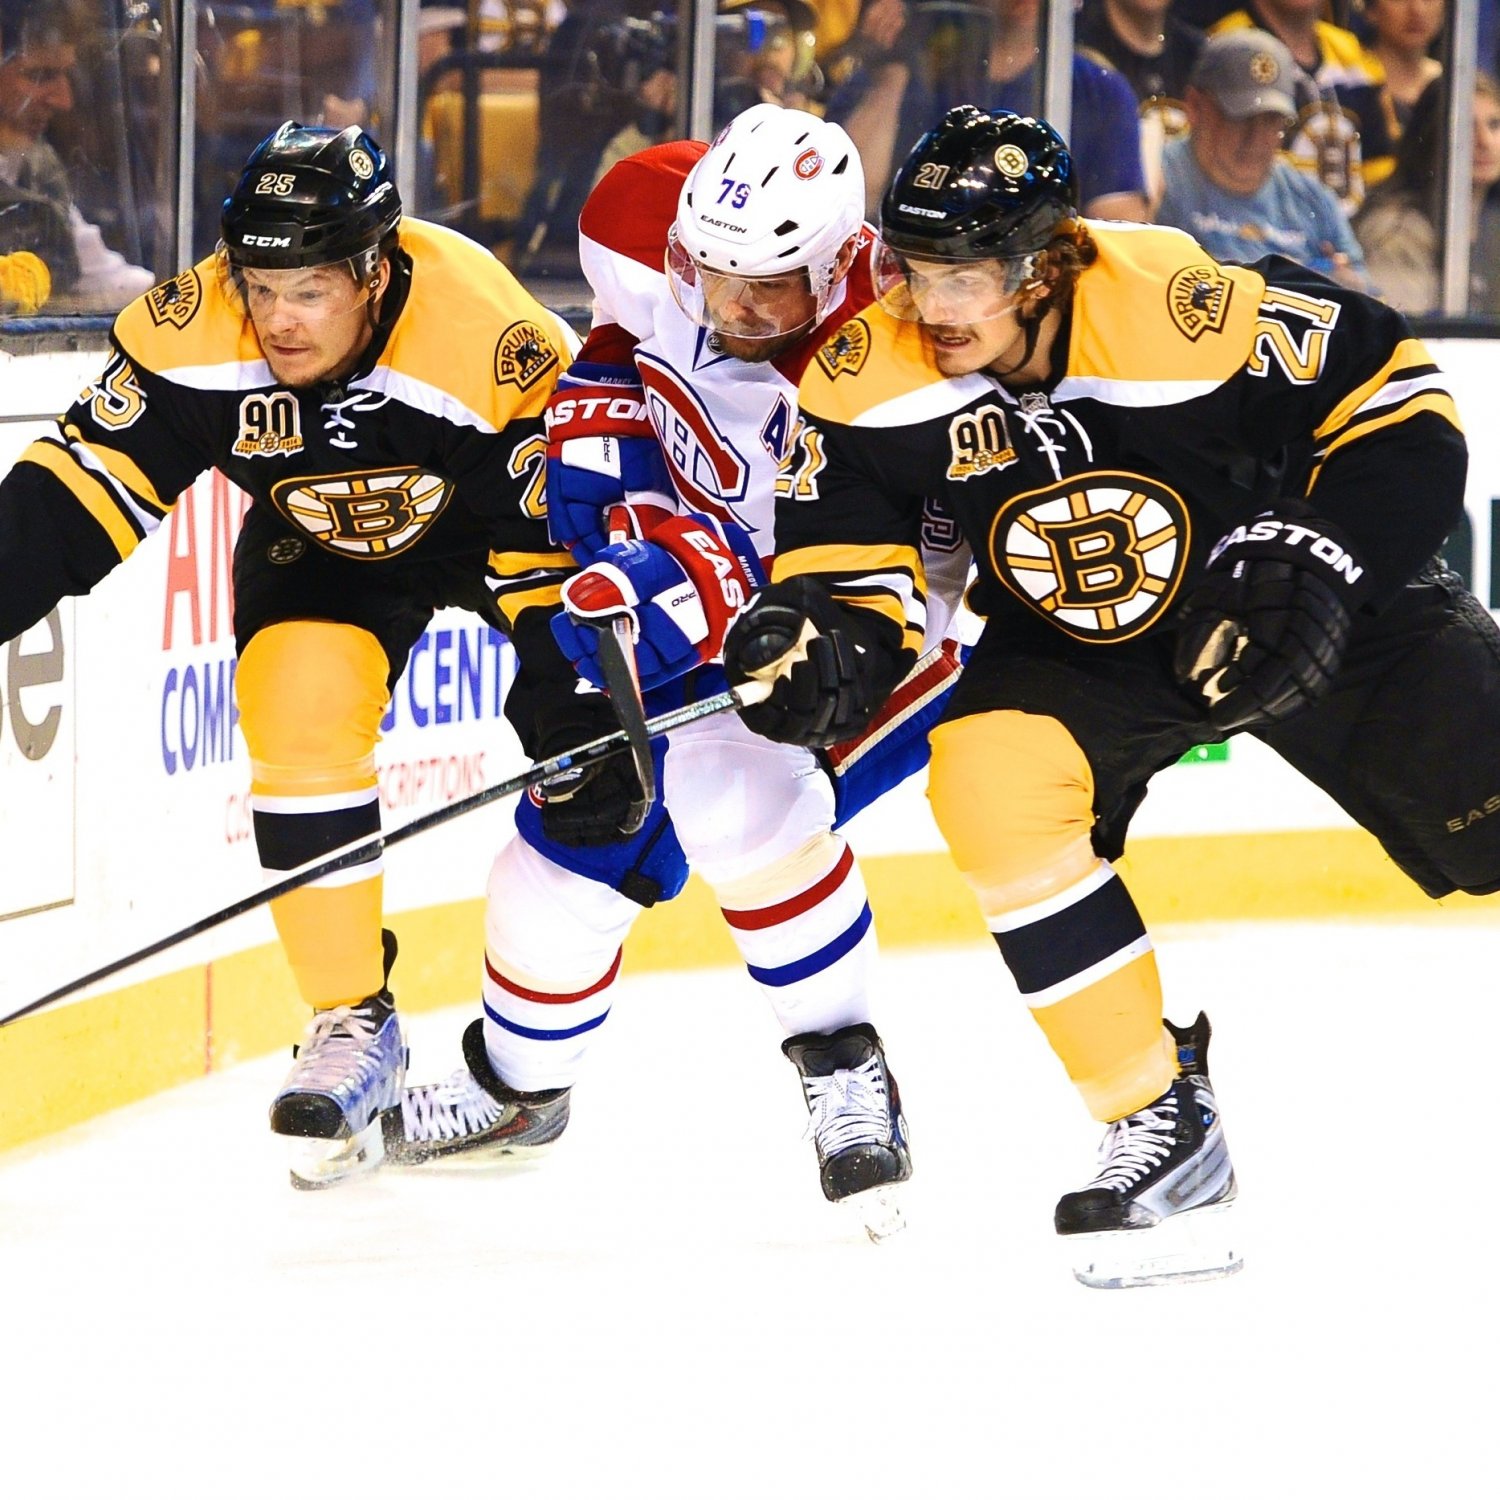 Montreal Canadiens vs. Boston Bruins Game 5 Live Score and Highlights